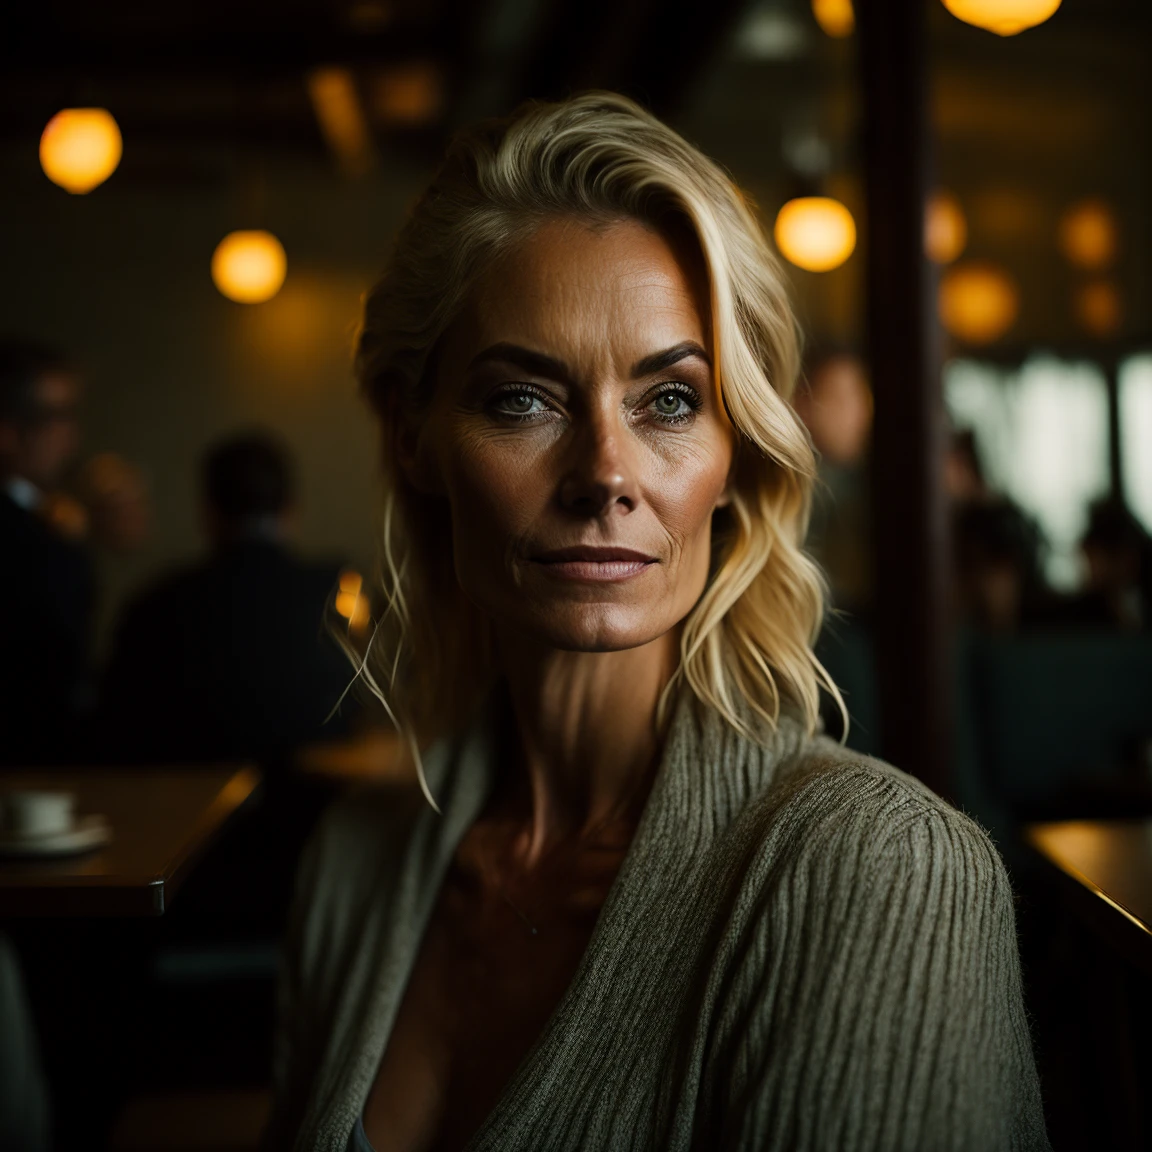 portrait oF a 40 year old blonde woman in a restaurant, clear Facial Features, cinématique, objectif 35 mm, F/1.8, éclairage d&#39;accentuation, Illumination globale